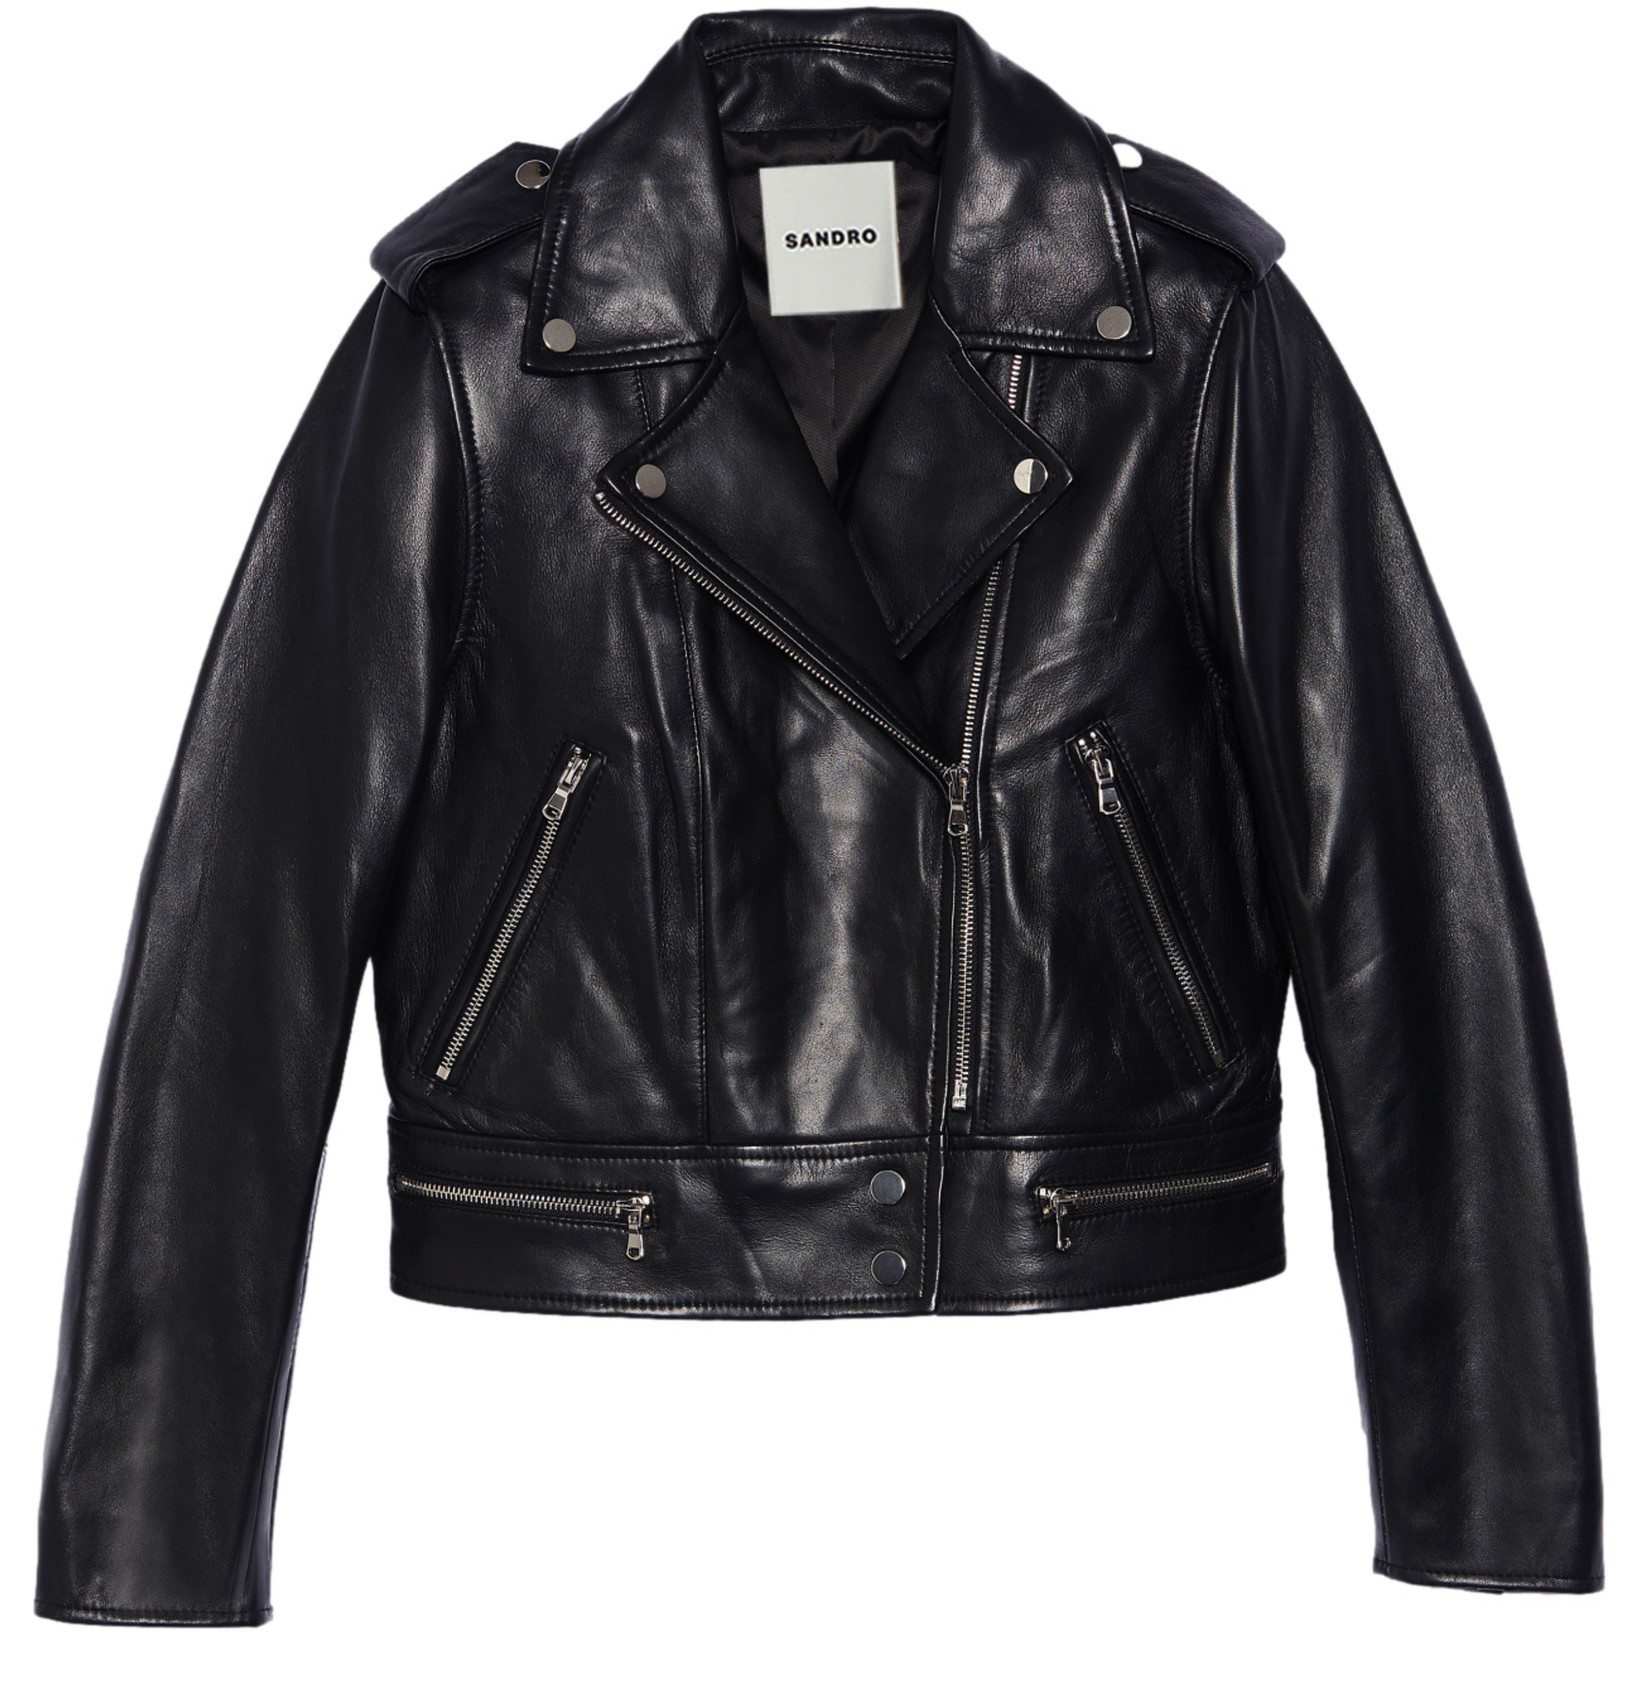 A black leather jacket with a white label Description automatically generated